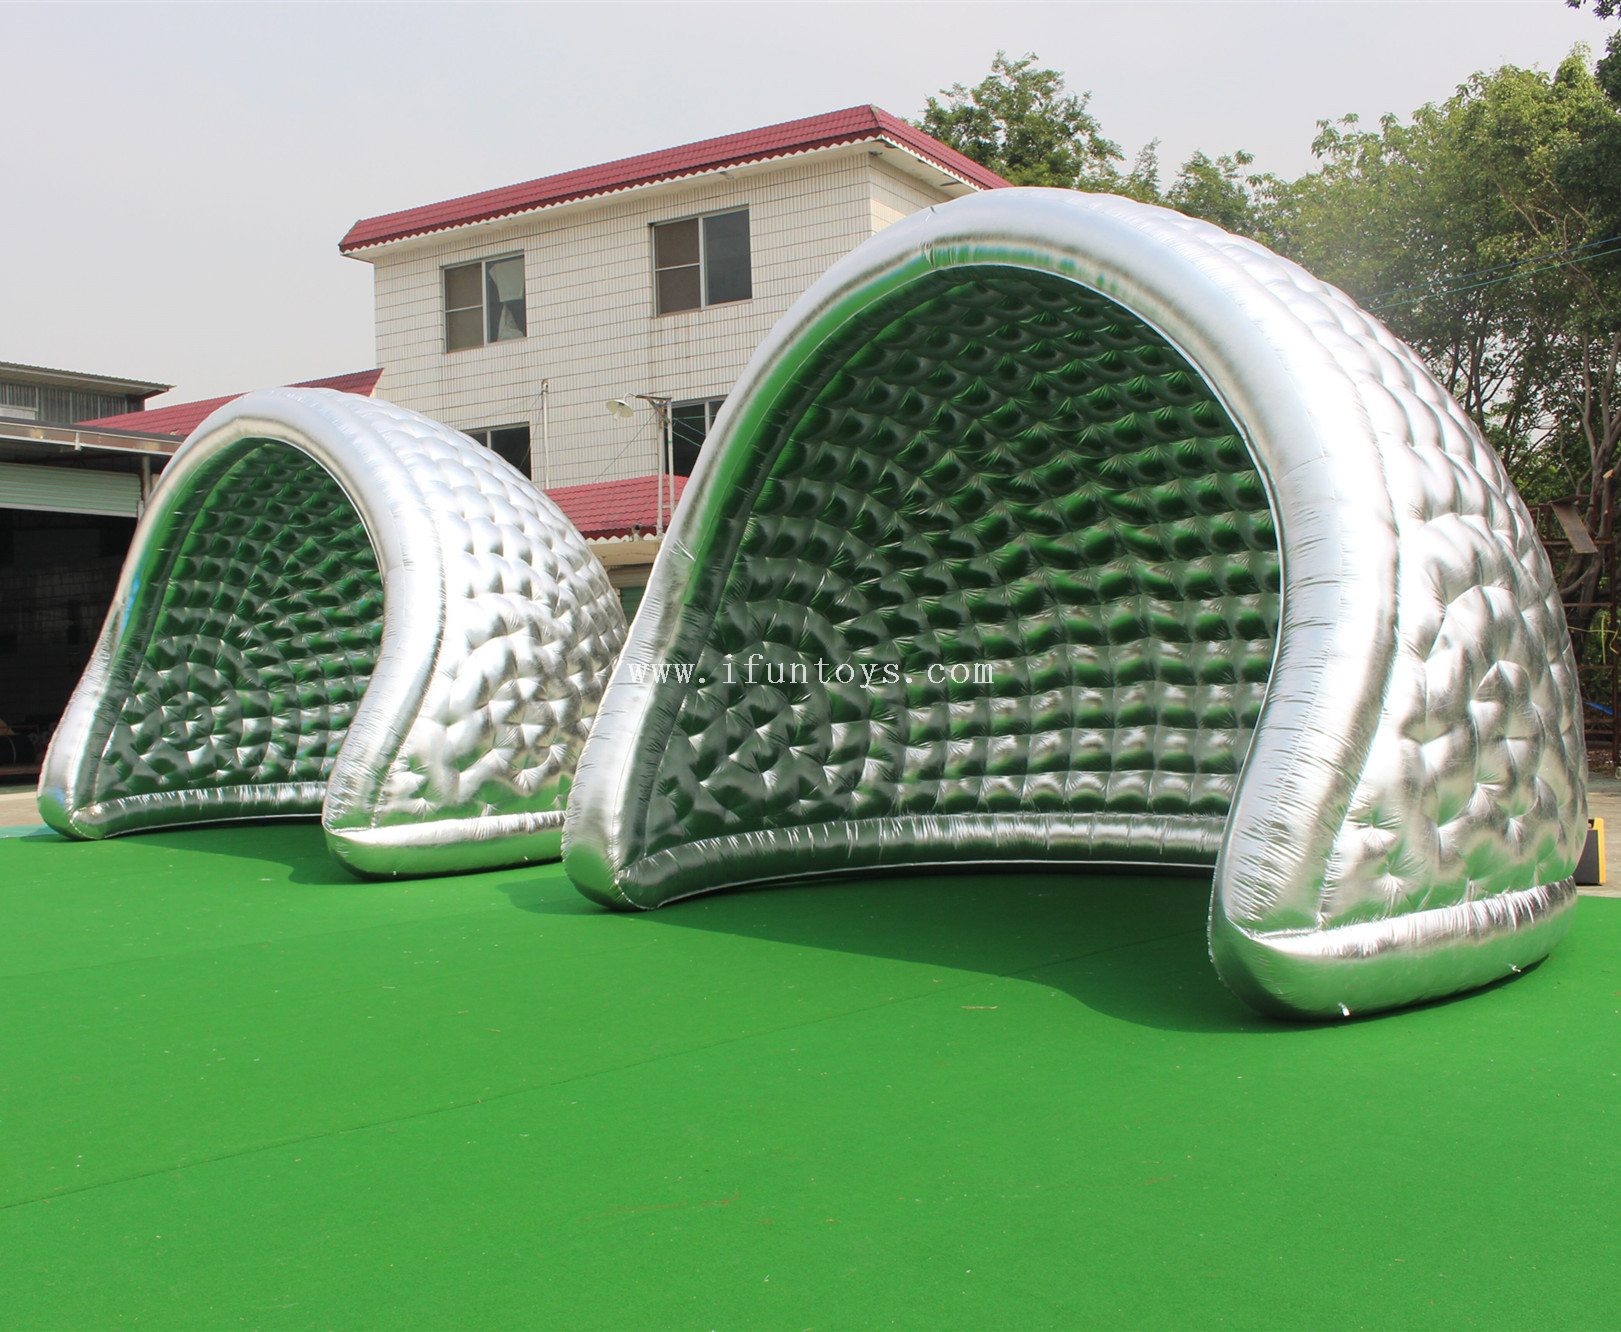 Customized Inflatable silver Luna Pods air dome tent/pop up pod tent /Inflatable Structure Dome tent for events